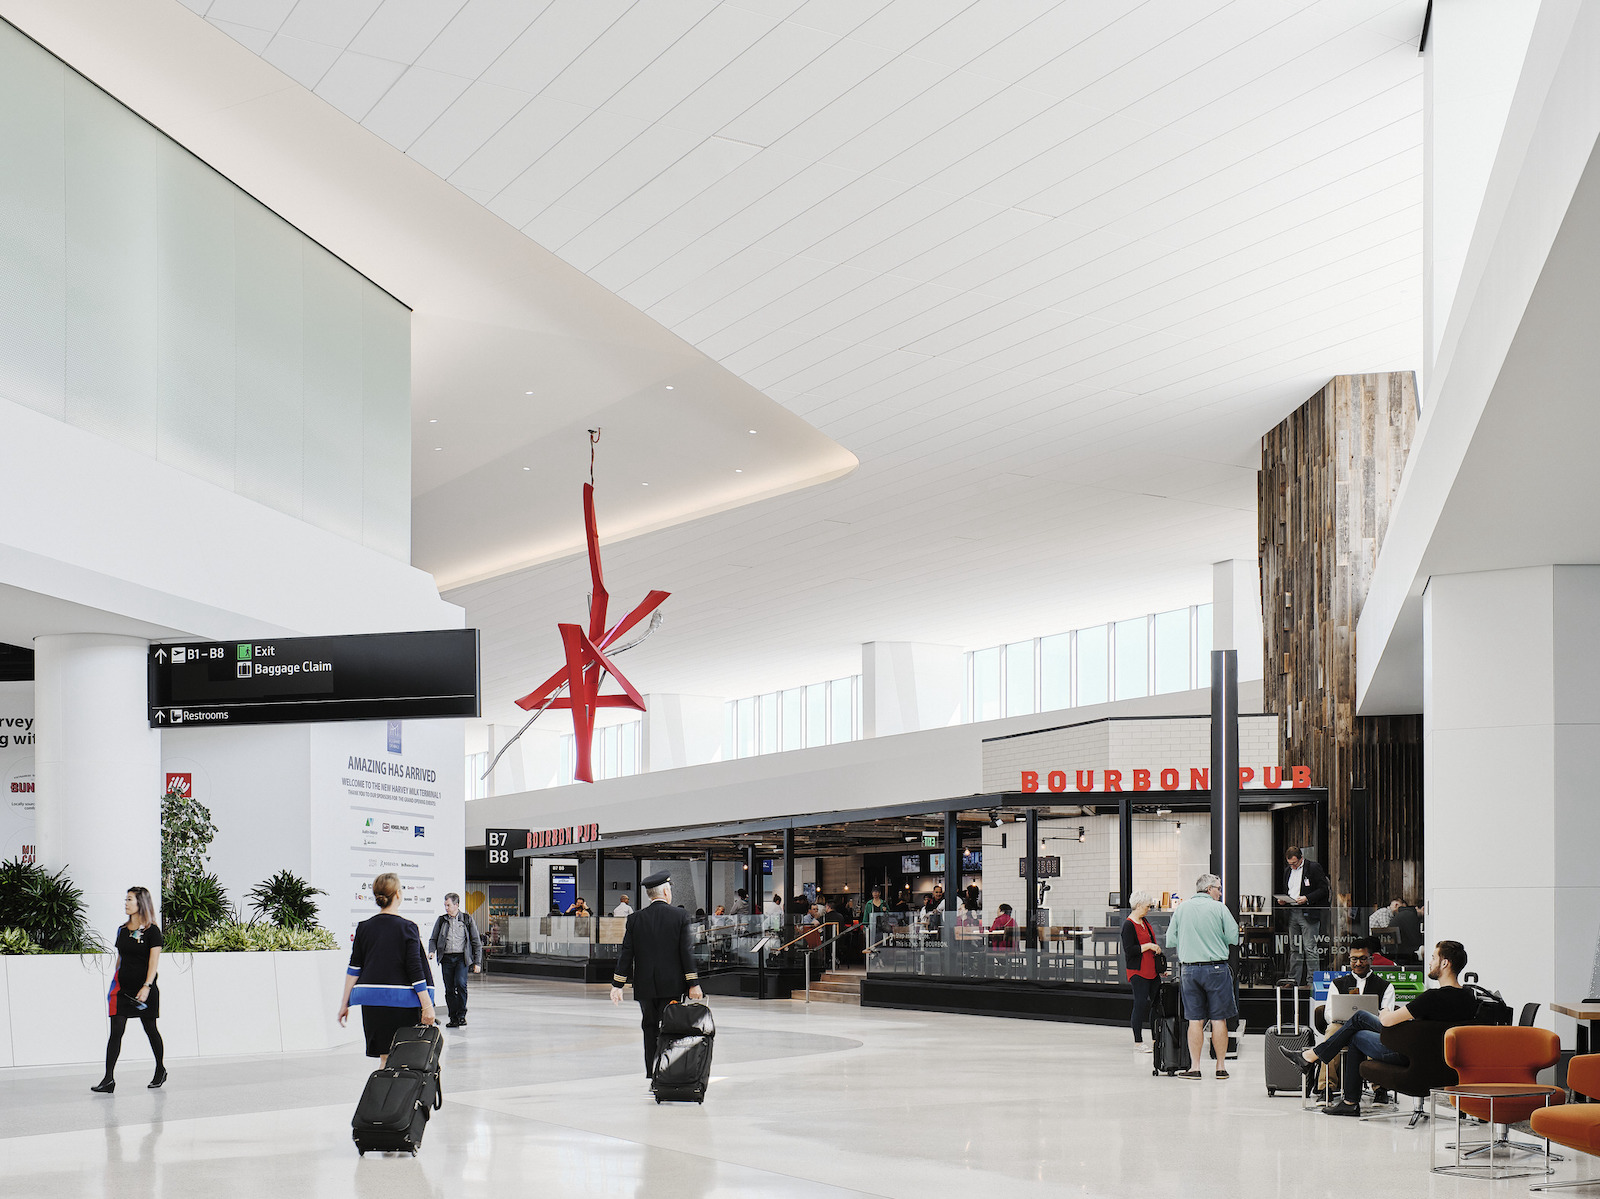 Harvey Milk Terminal 1 becomes first airport terminal to achieve LEED v4 Platinum Certification